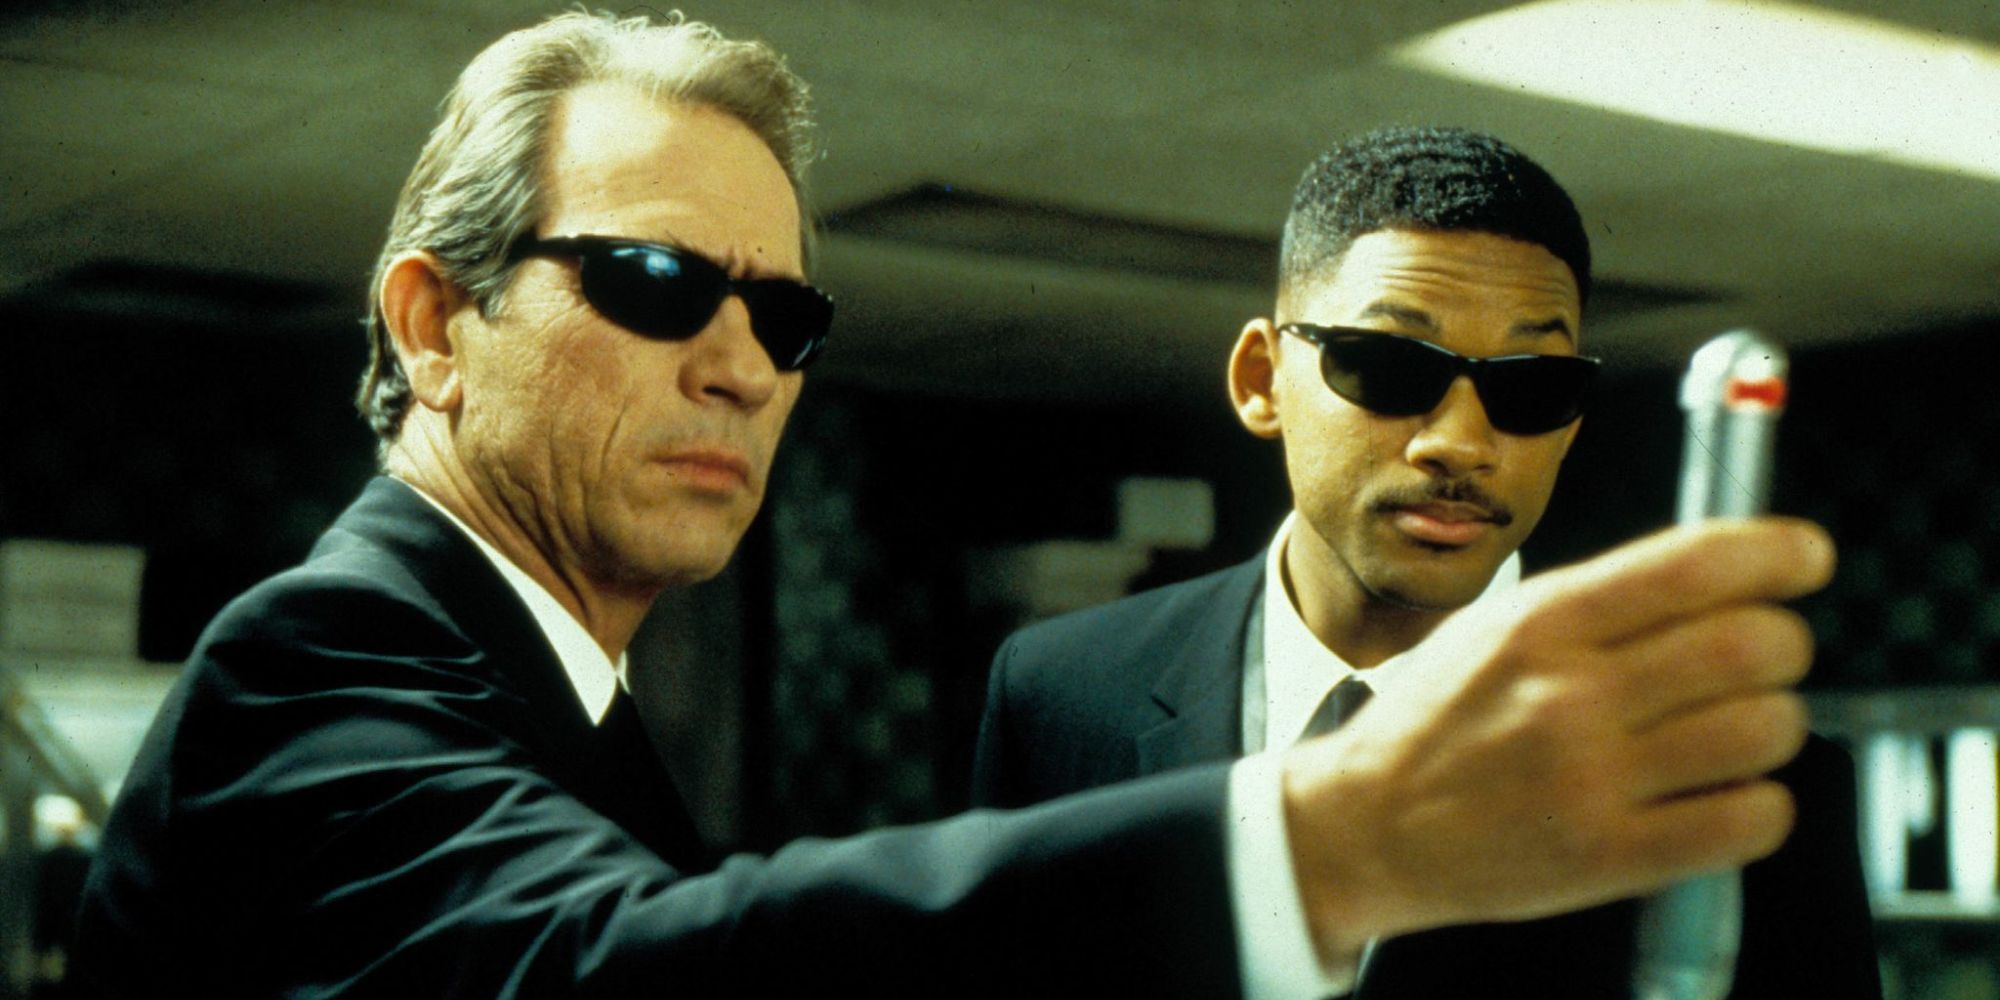 An image of Will Smith and Tommy Lee Jones in Men in Black. Jones is holding a memory eraser pen